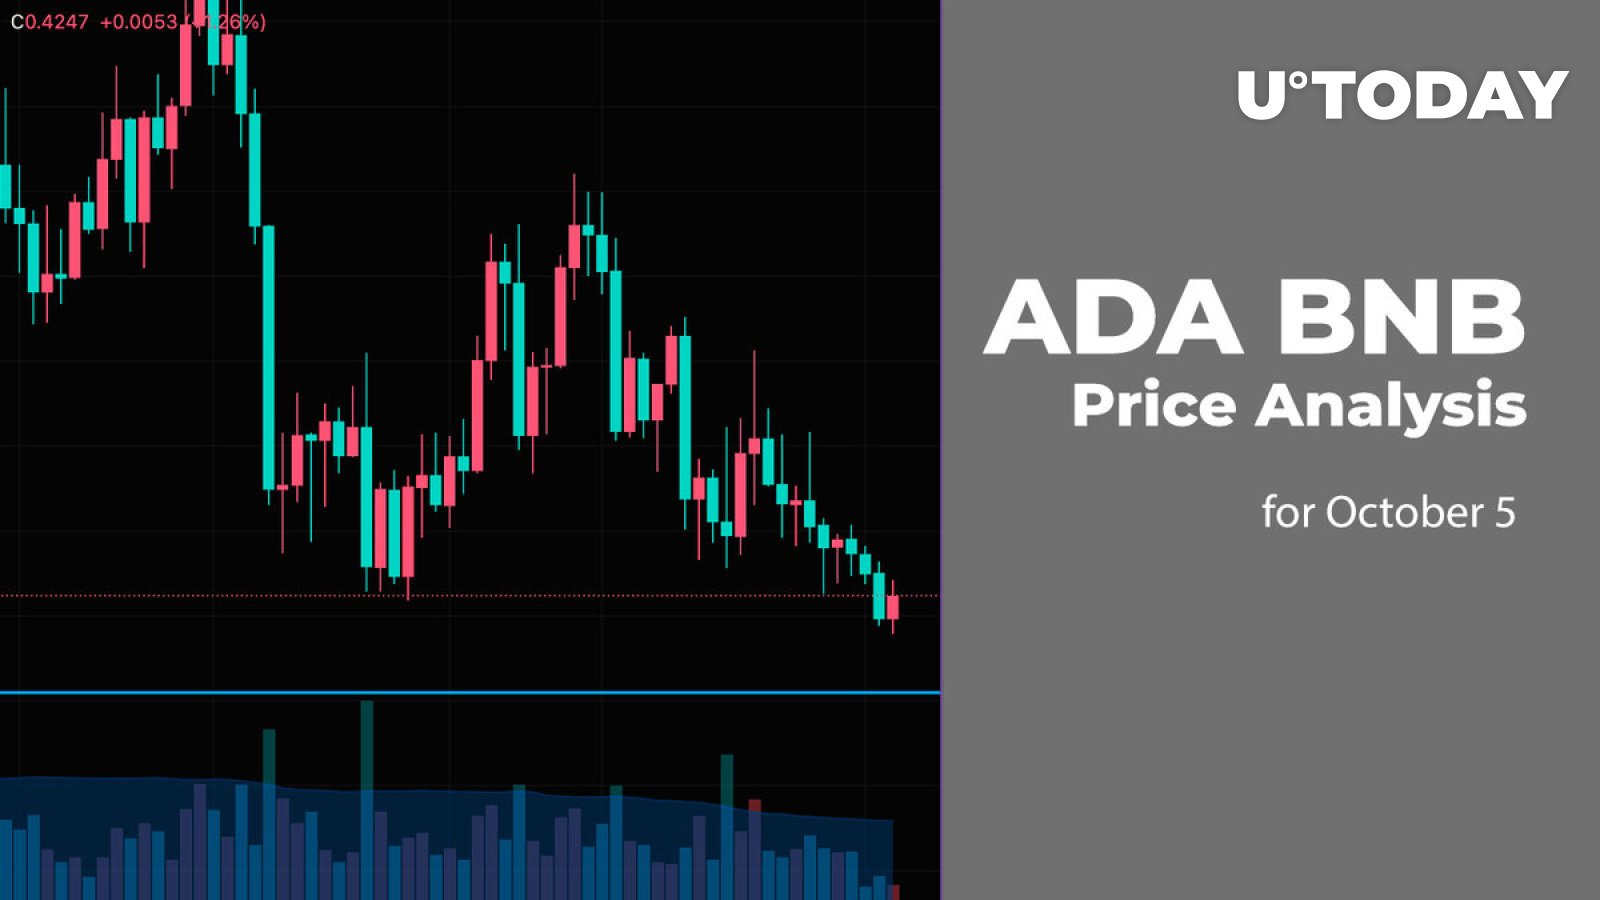 ADA and BNB Price Analysis for October 5